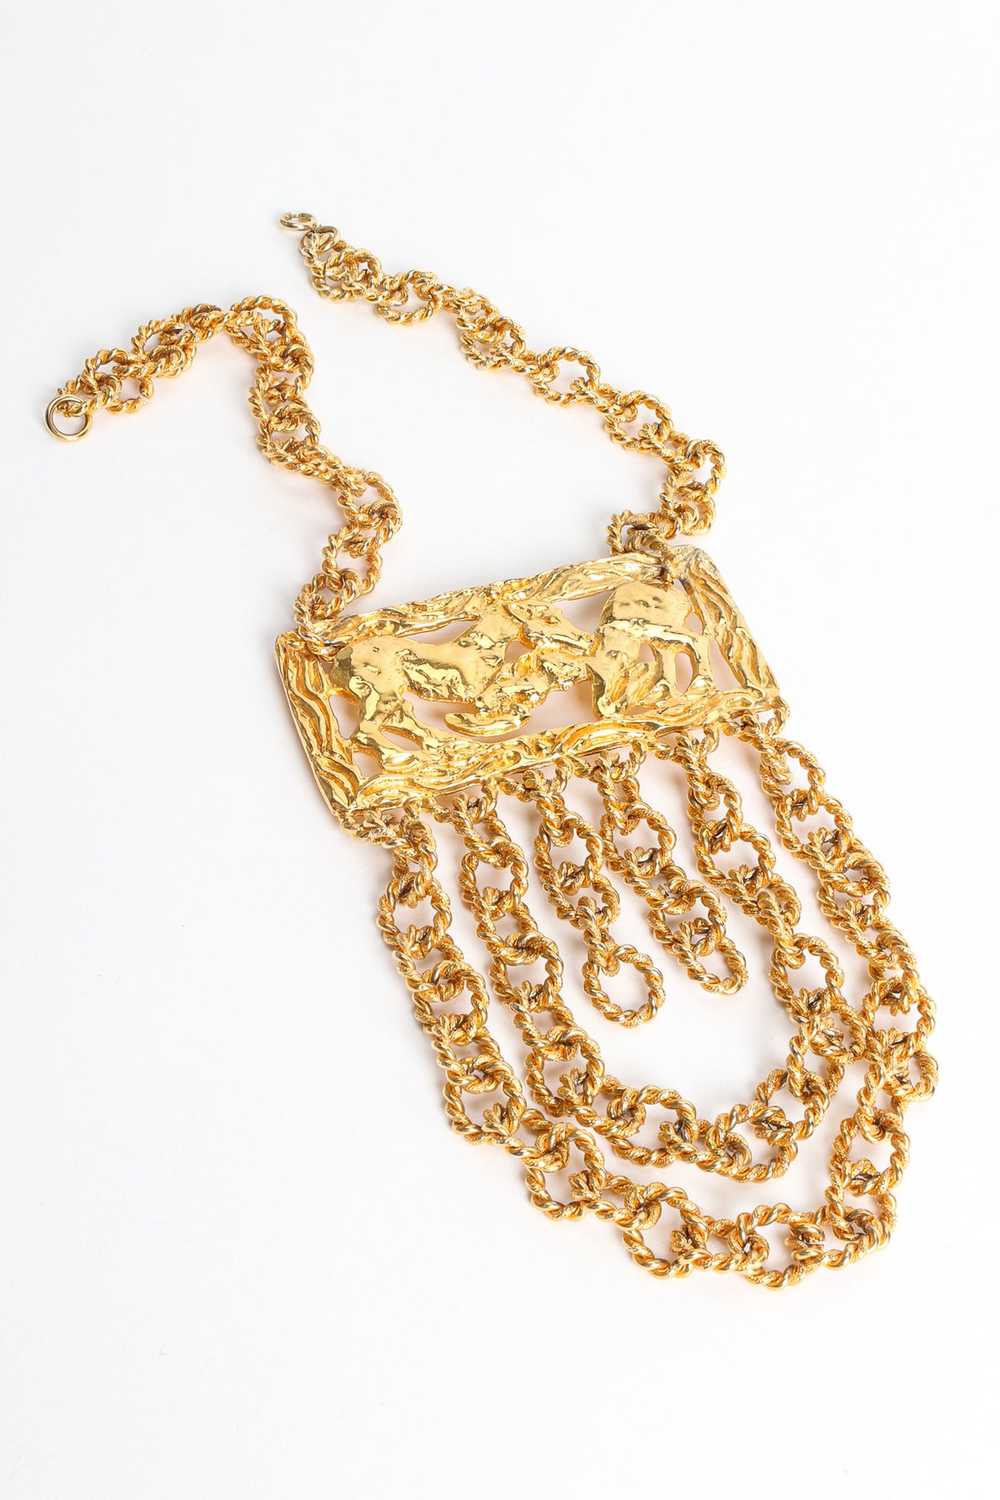 Golden Horse Pendant Rope Chain Necklace - image 1